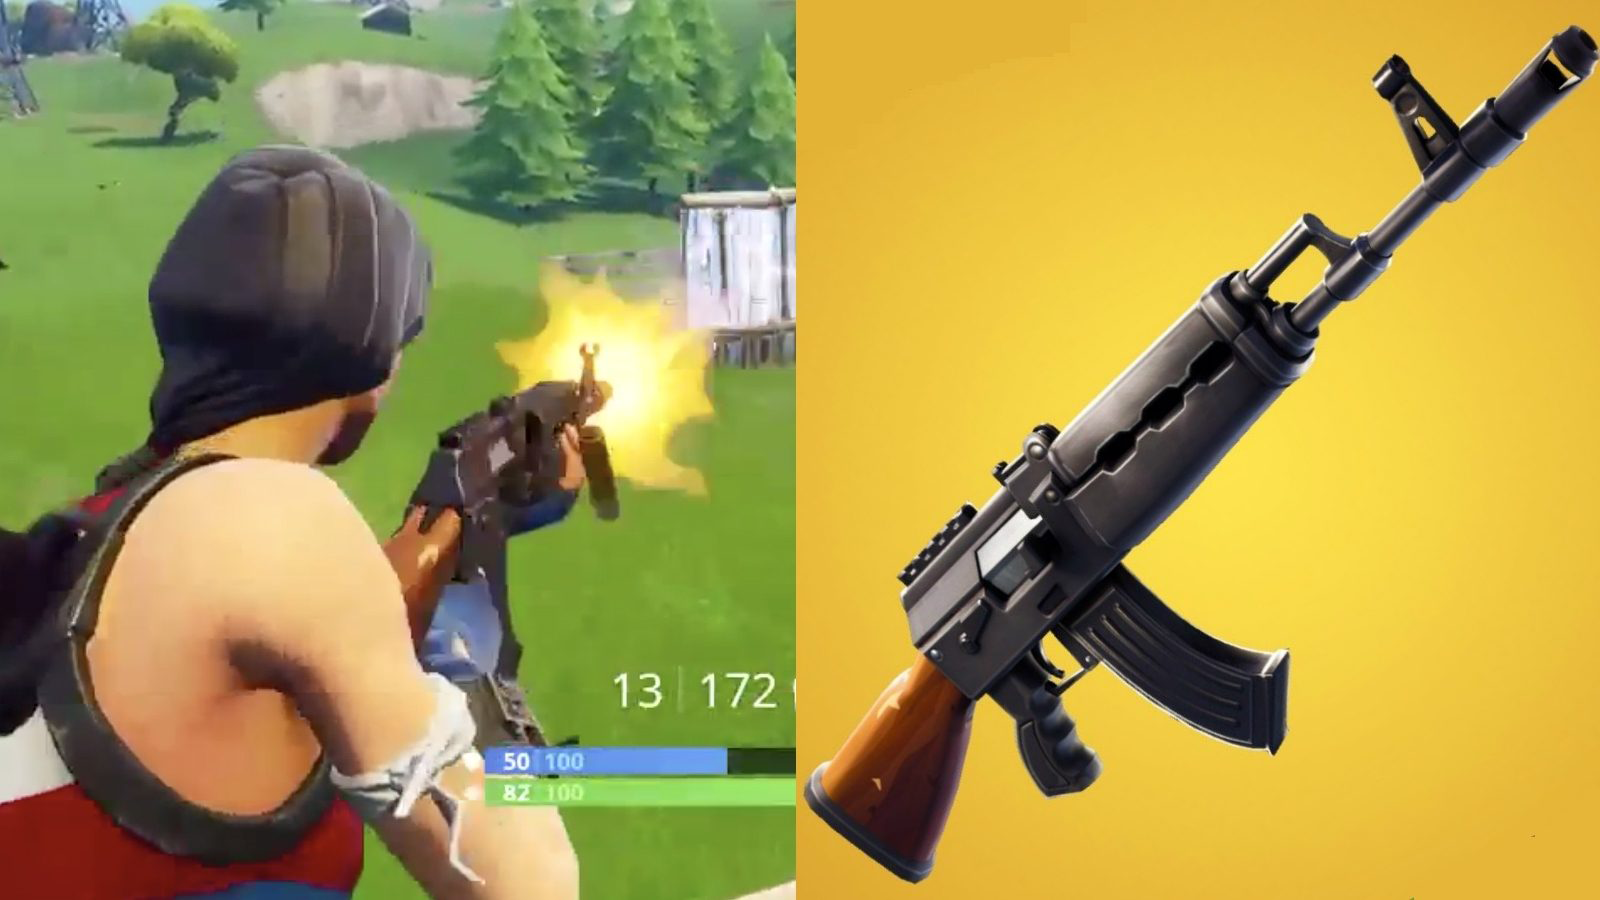 The 20 Best Legendary Weapons In Fortnite And 10 That Are - the heavy assault rifle dubbed the a k by the fans of fortnite over its resemblanc!   e to its real life counterpart ak 47 is a fantastic weapon